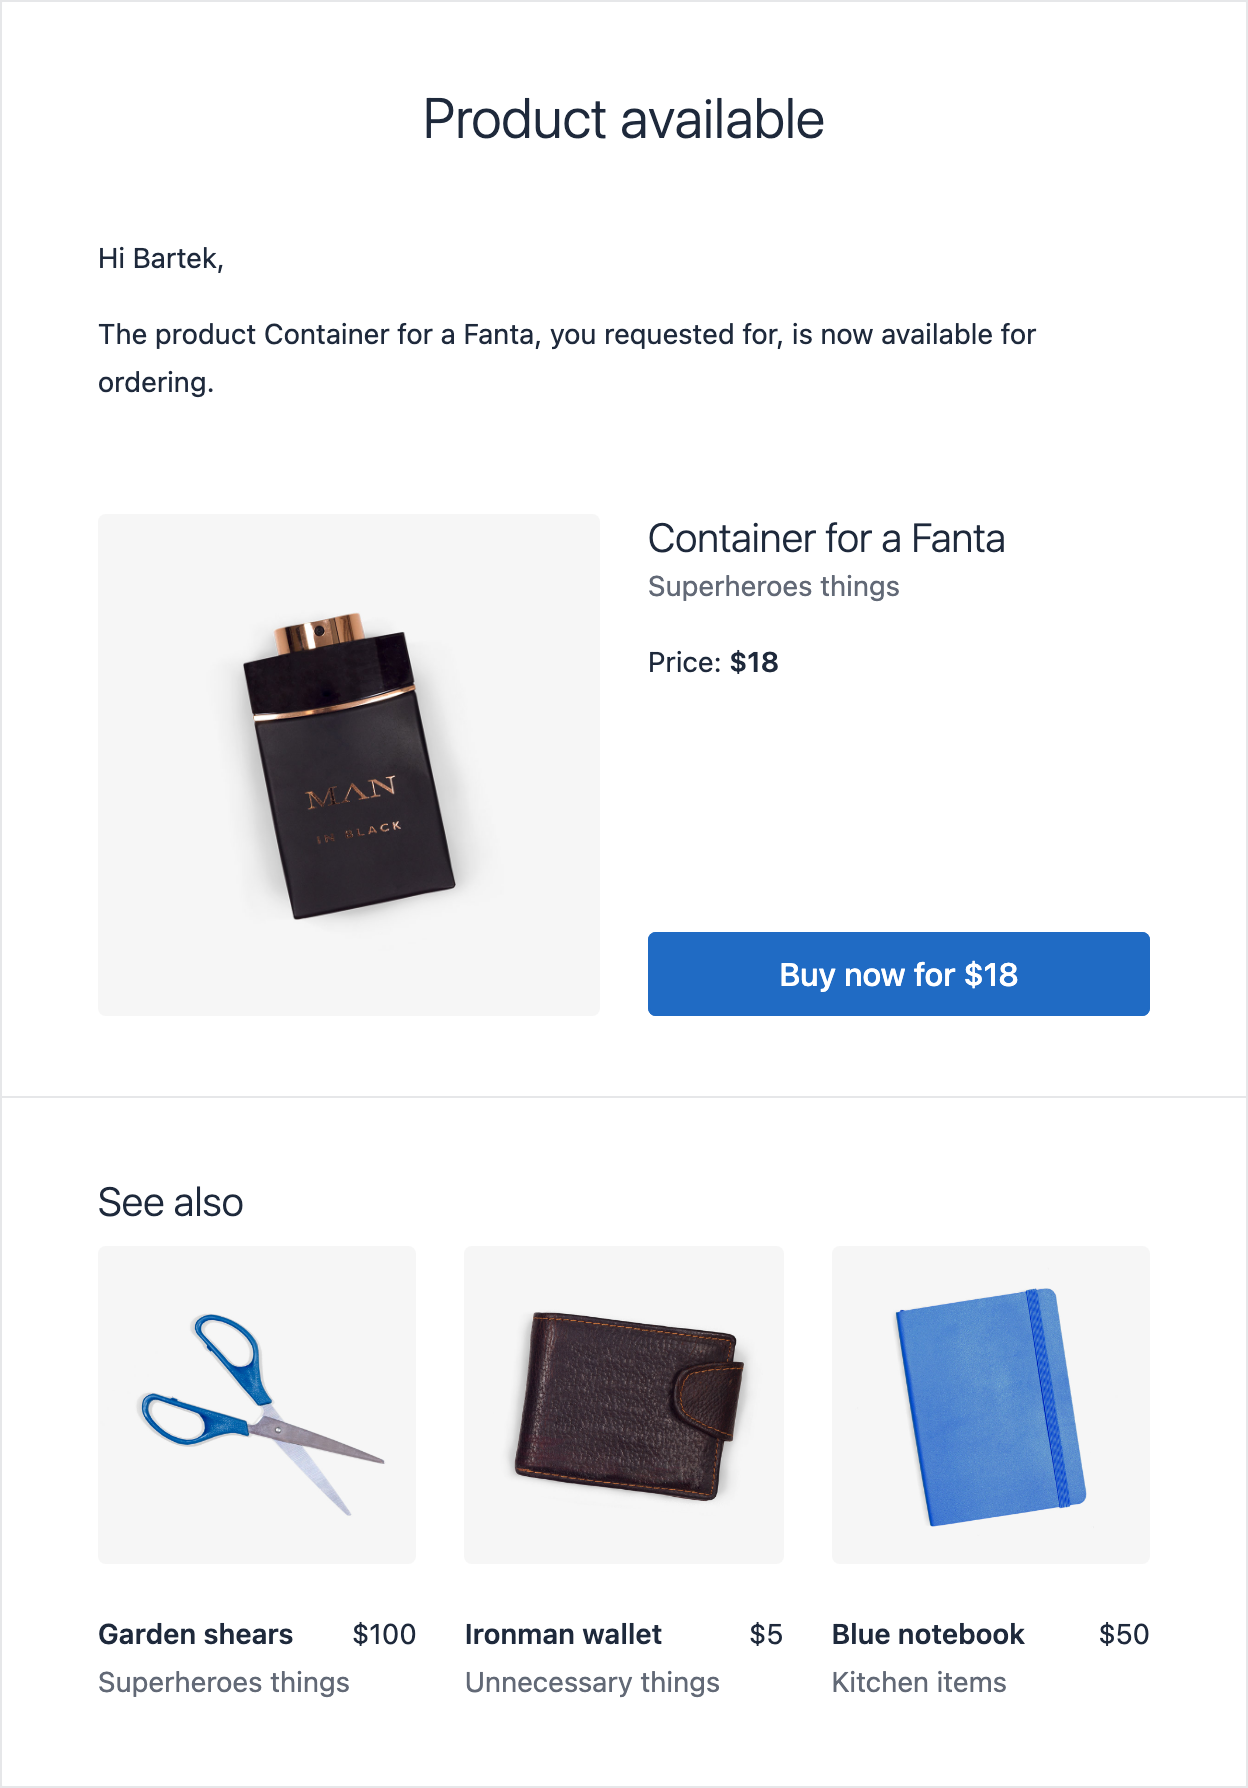 Email template with an available product